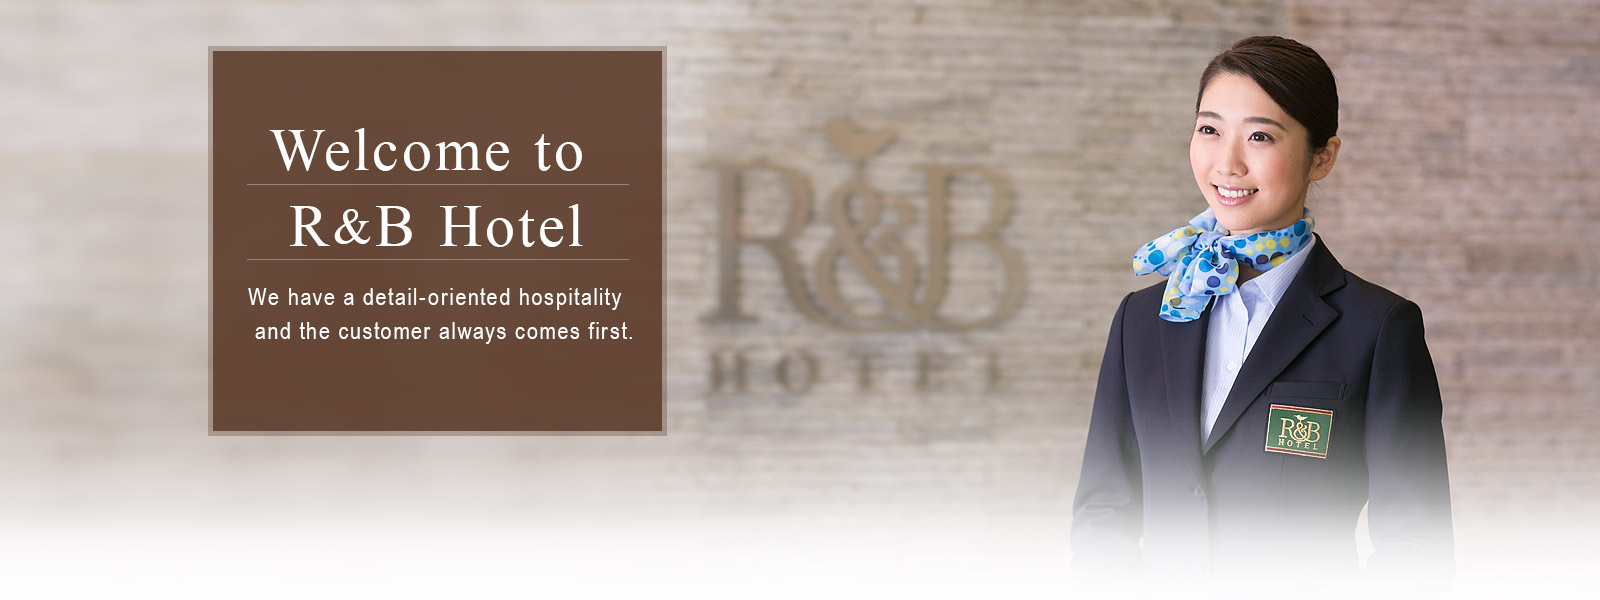 Welcome to R&B Hotel